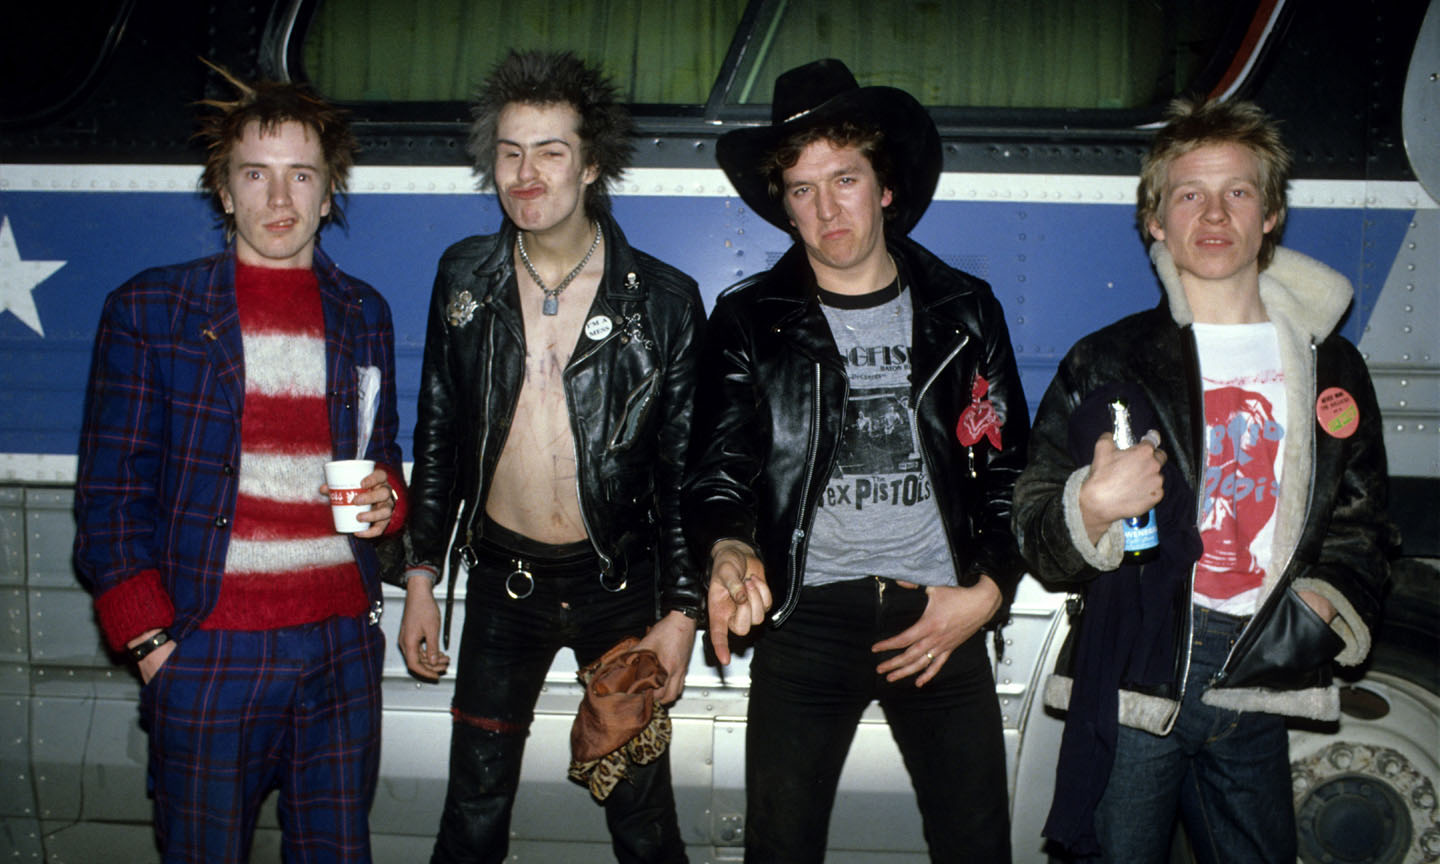 Alternage Presents: The Most Influential Punk Albums - The Sex Pistols